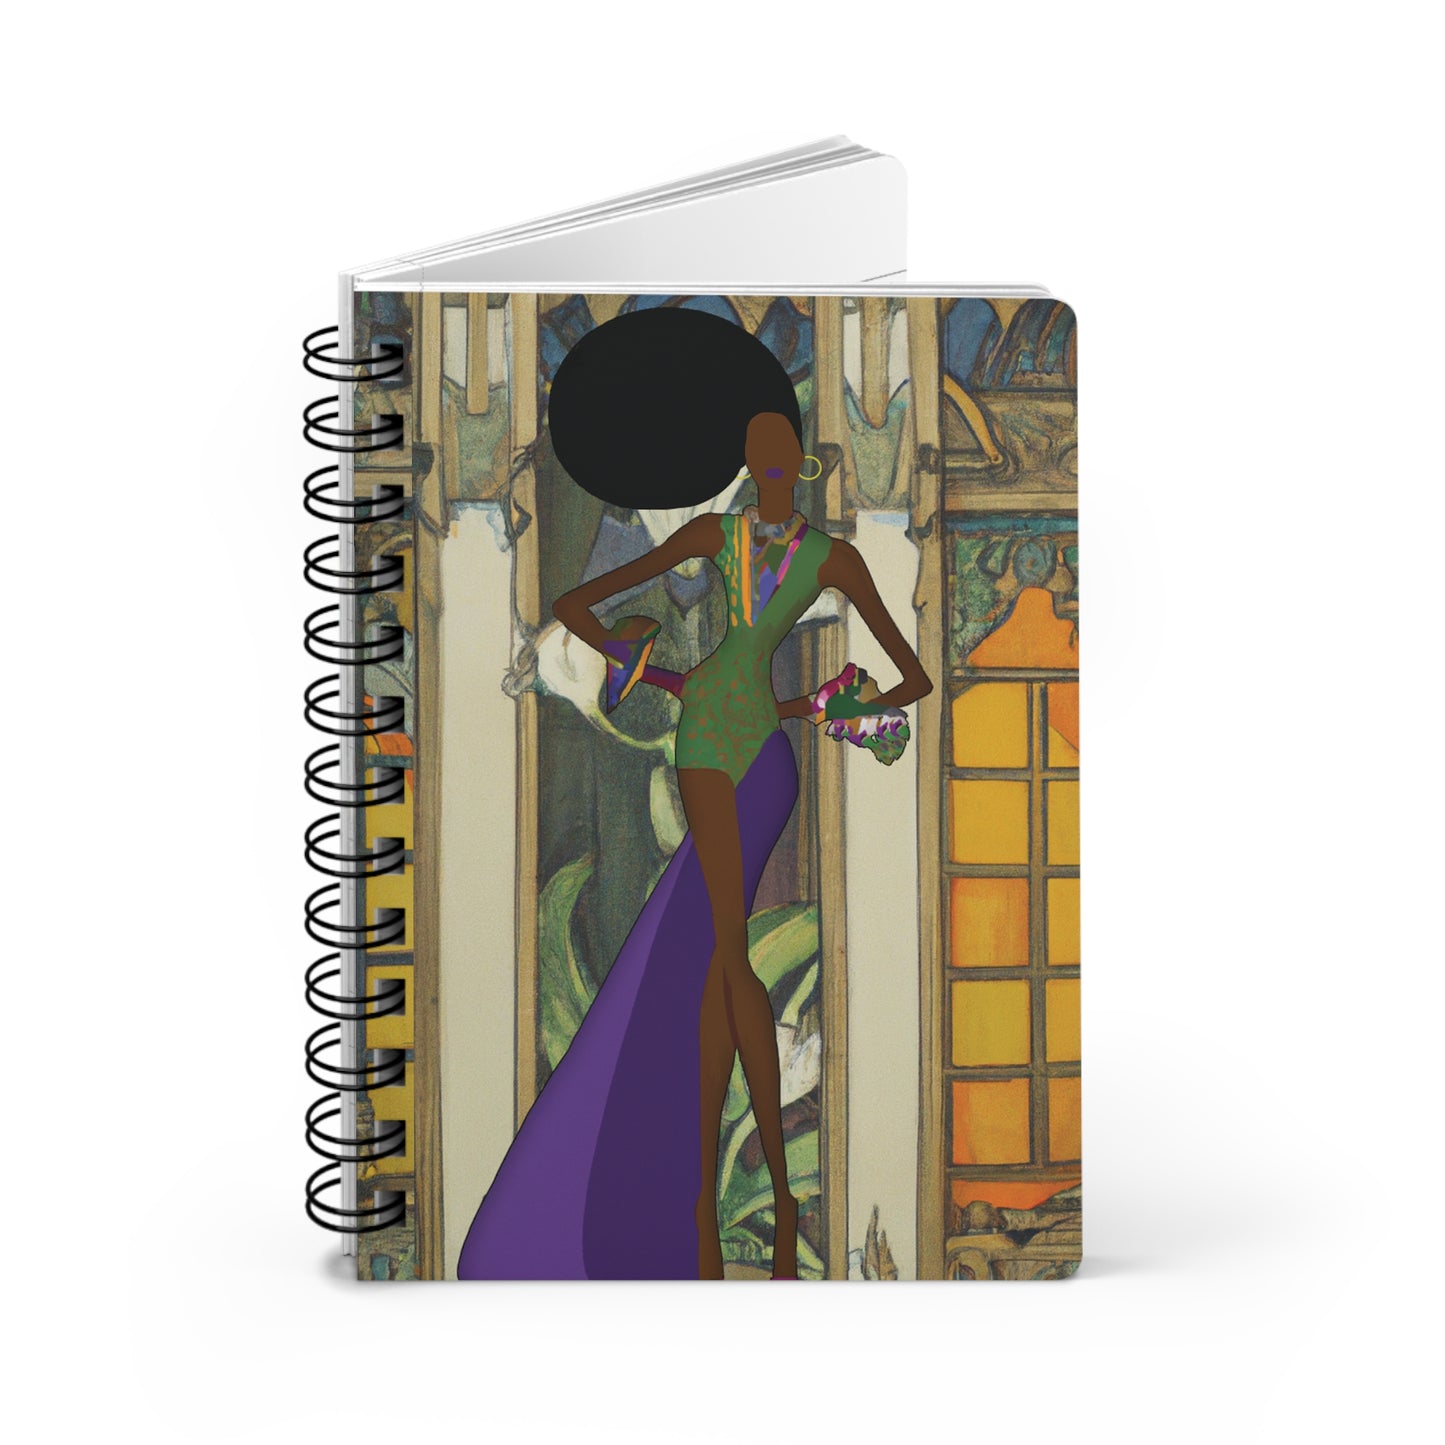 Ella Spiral Bound Notebooks and Journals with 2023-2024 Year-at-a-Glance Calendar